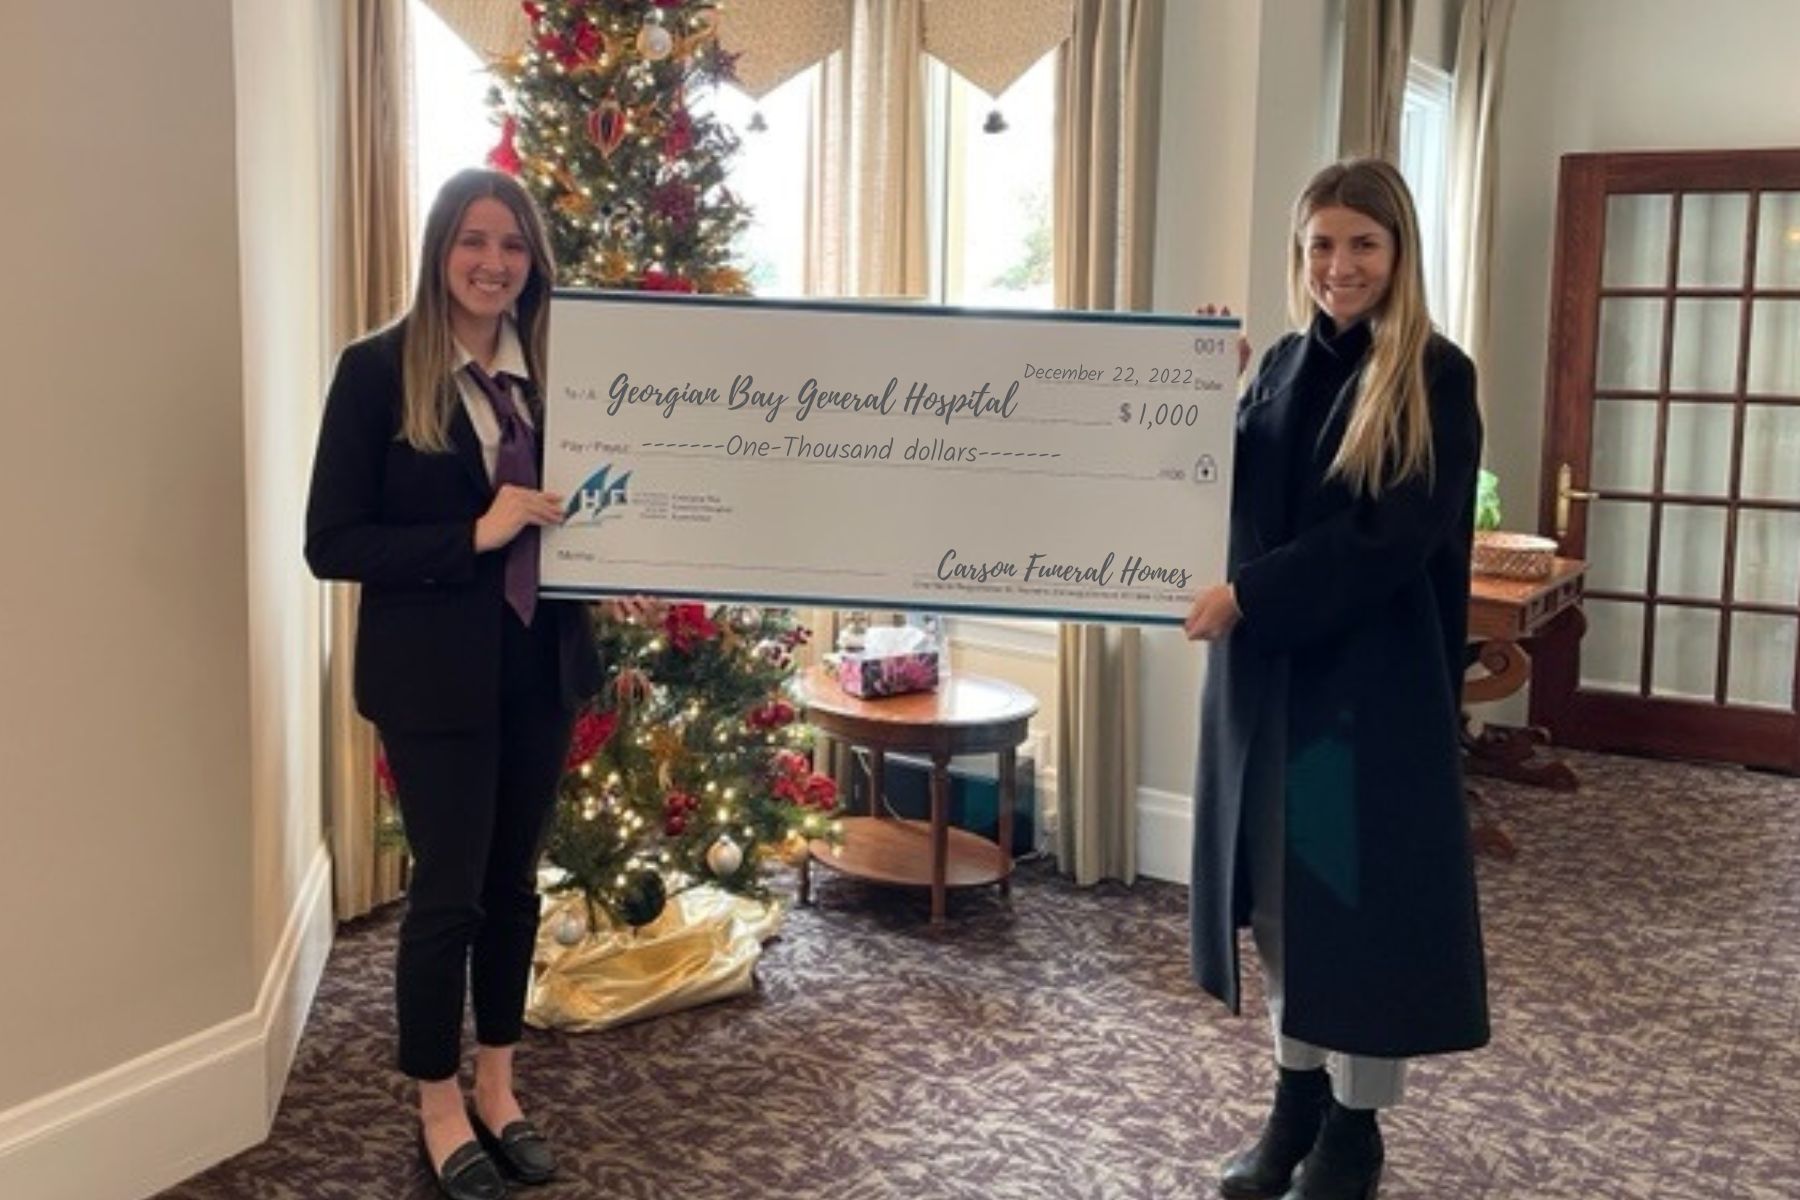 Two women holding a giant cheque to GBGH for $1,000 from Carson Funeral Homes